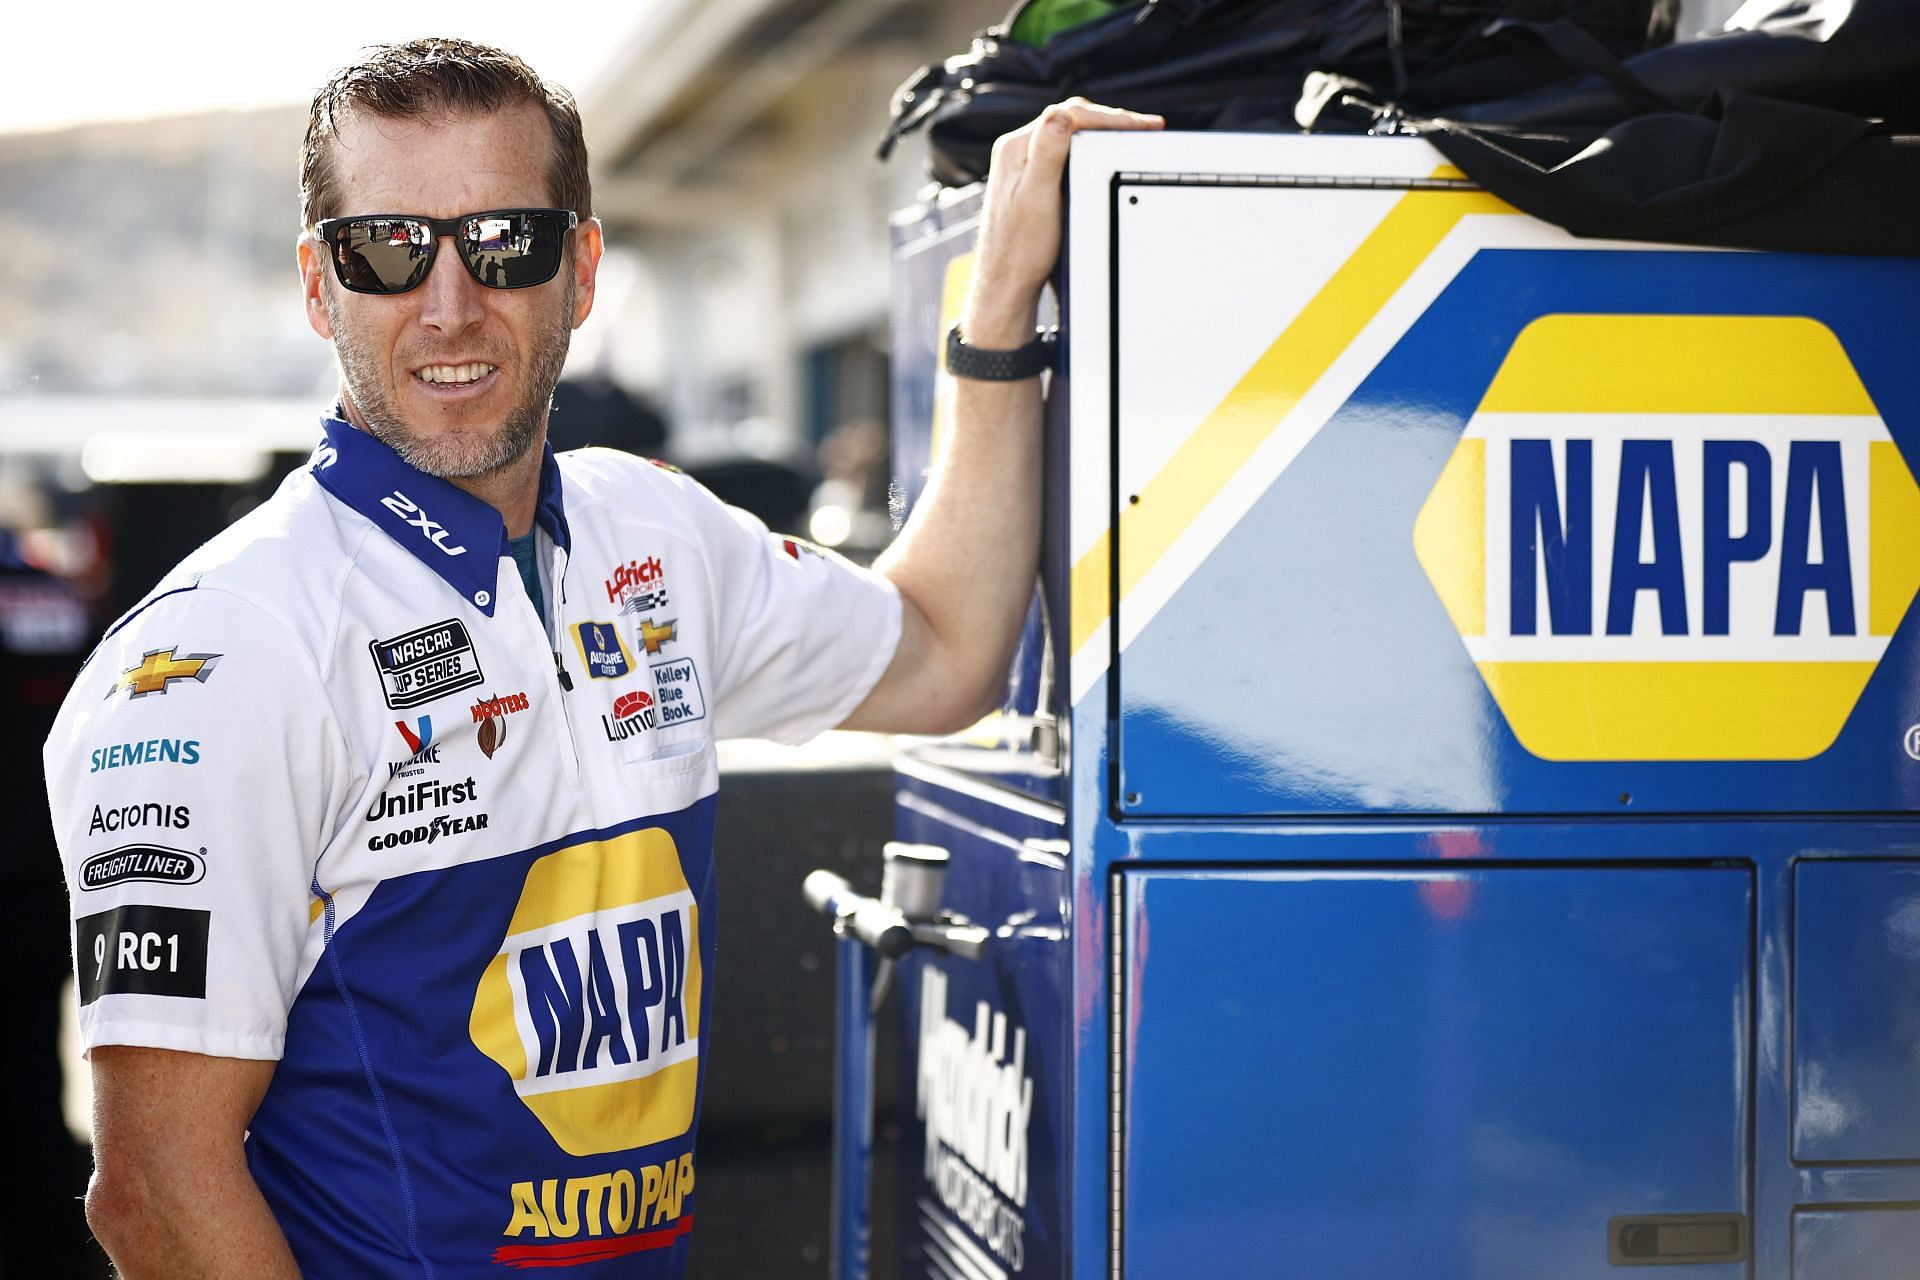 Crew chief Alan Gustafson, of the #9 NAPA Auto Parts Chevrolet, waits in the garage area prior to the NASCAR Cup Series Championship at Phoenix Raceway. (Photo by Jared C. Tilton/Getty Images)